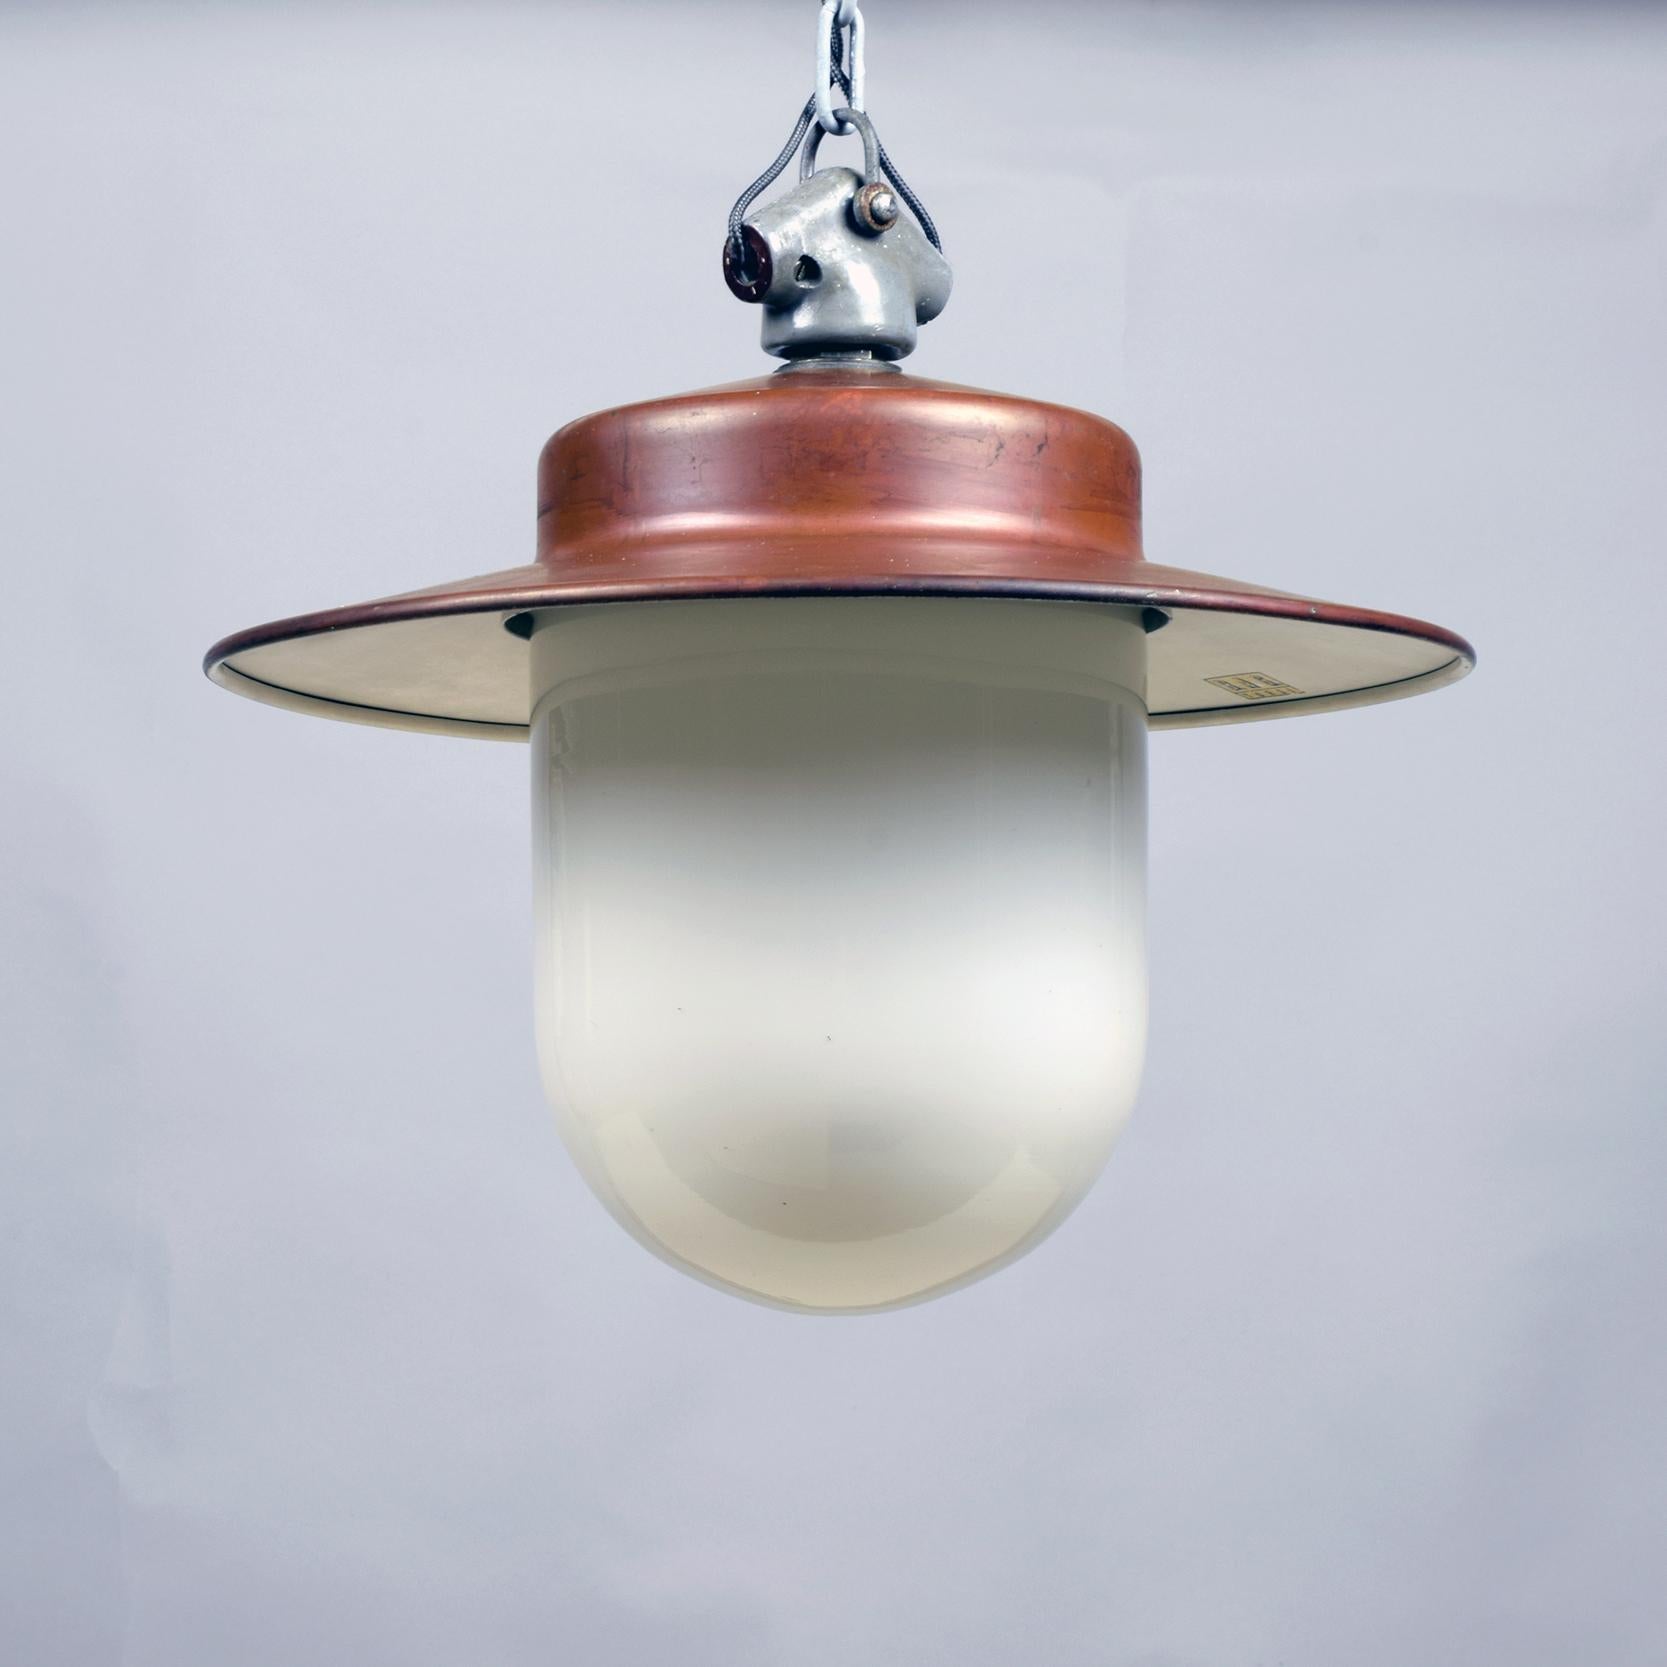 Hin Bredendieck (Designer) attributed.
B.A.G. Turgi (manufacturer)
Industrial pendant lamp, circa 1930

A stunning, elegant industrial lamp, giving out a pleasing, diffused light.

Copper and opaque white glass with chunky industrial